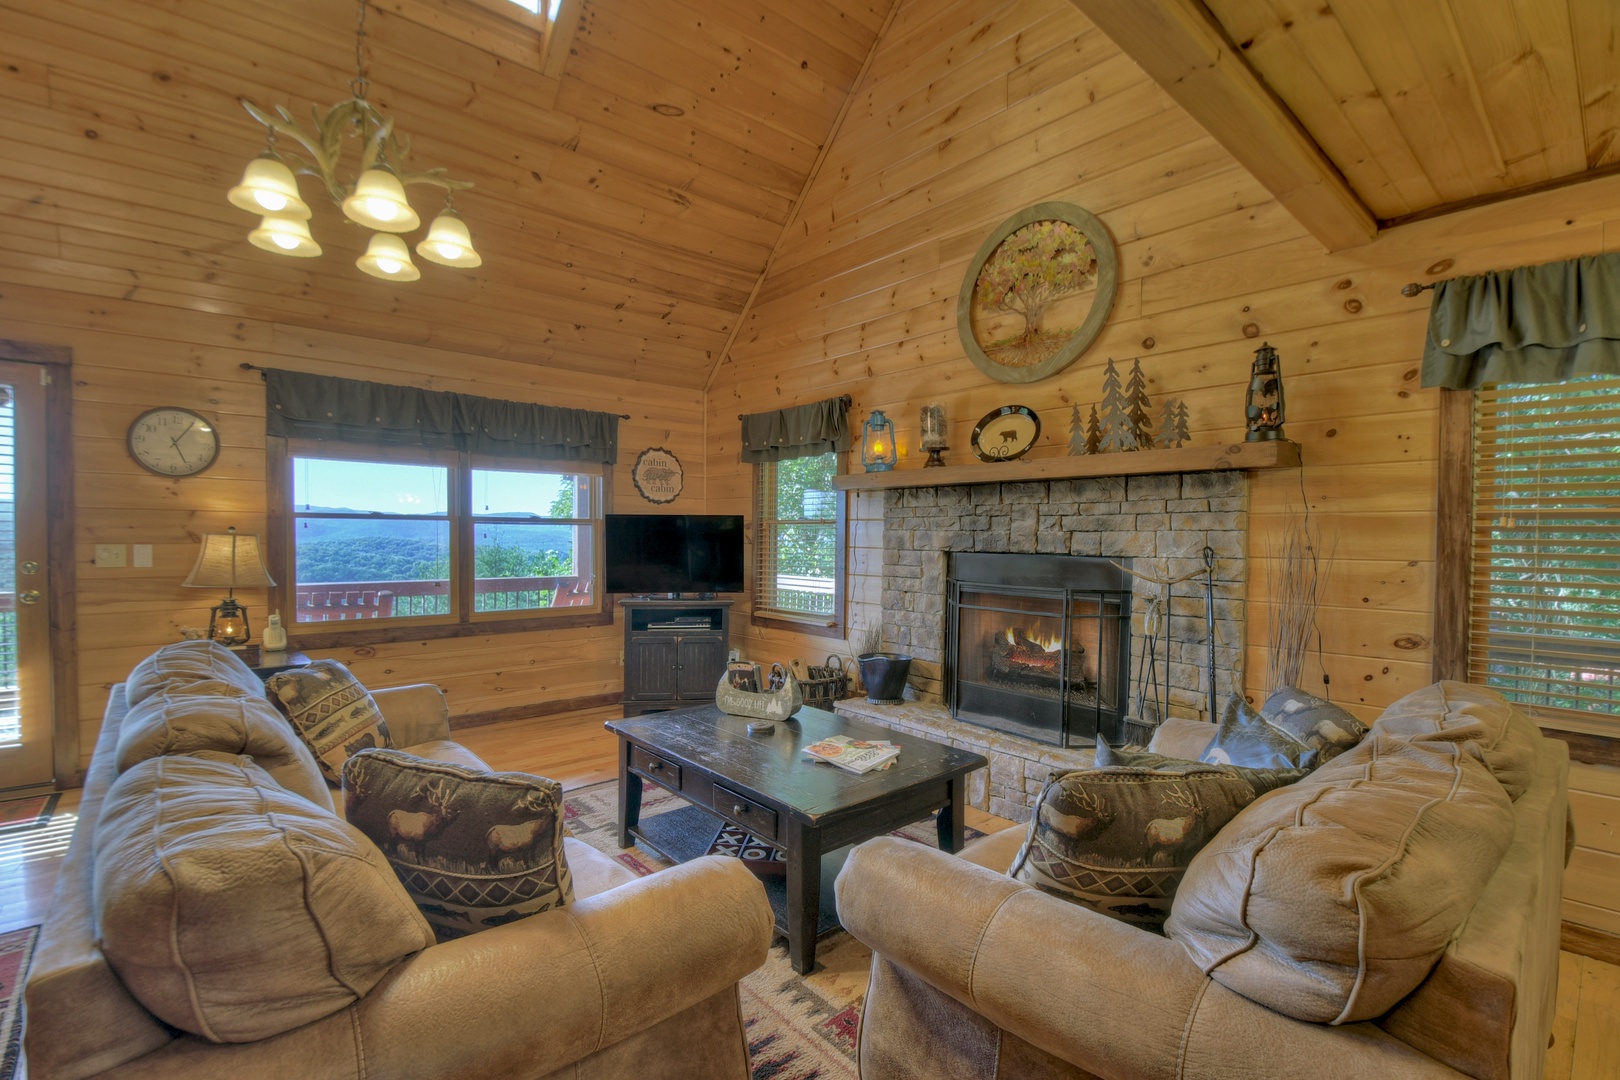 Sunrock Mountain Hideaway- Living room with a fireplace and couch seating